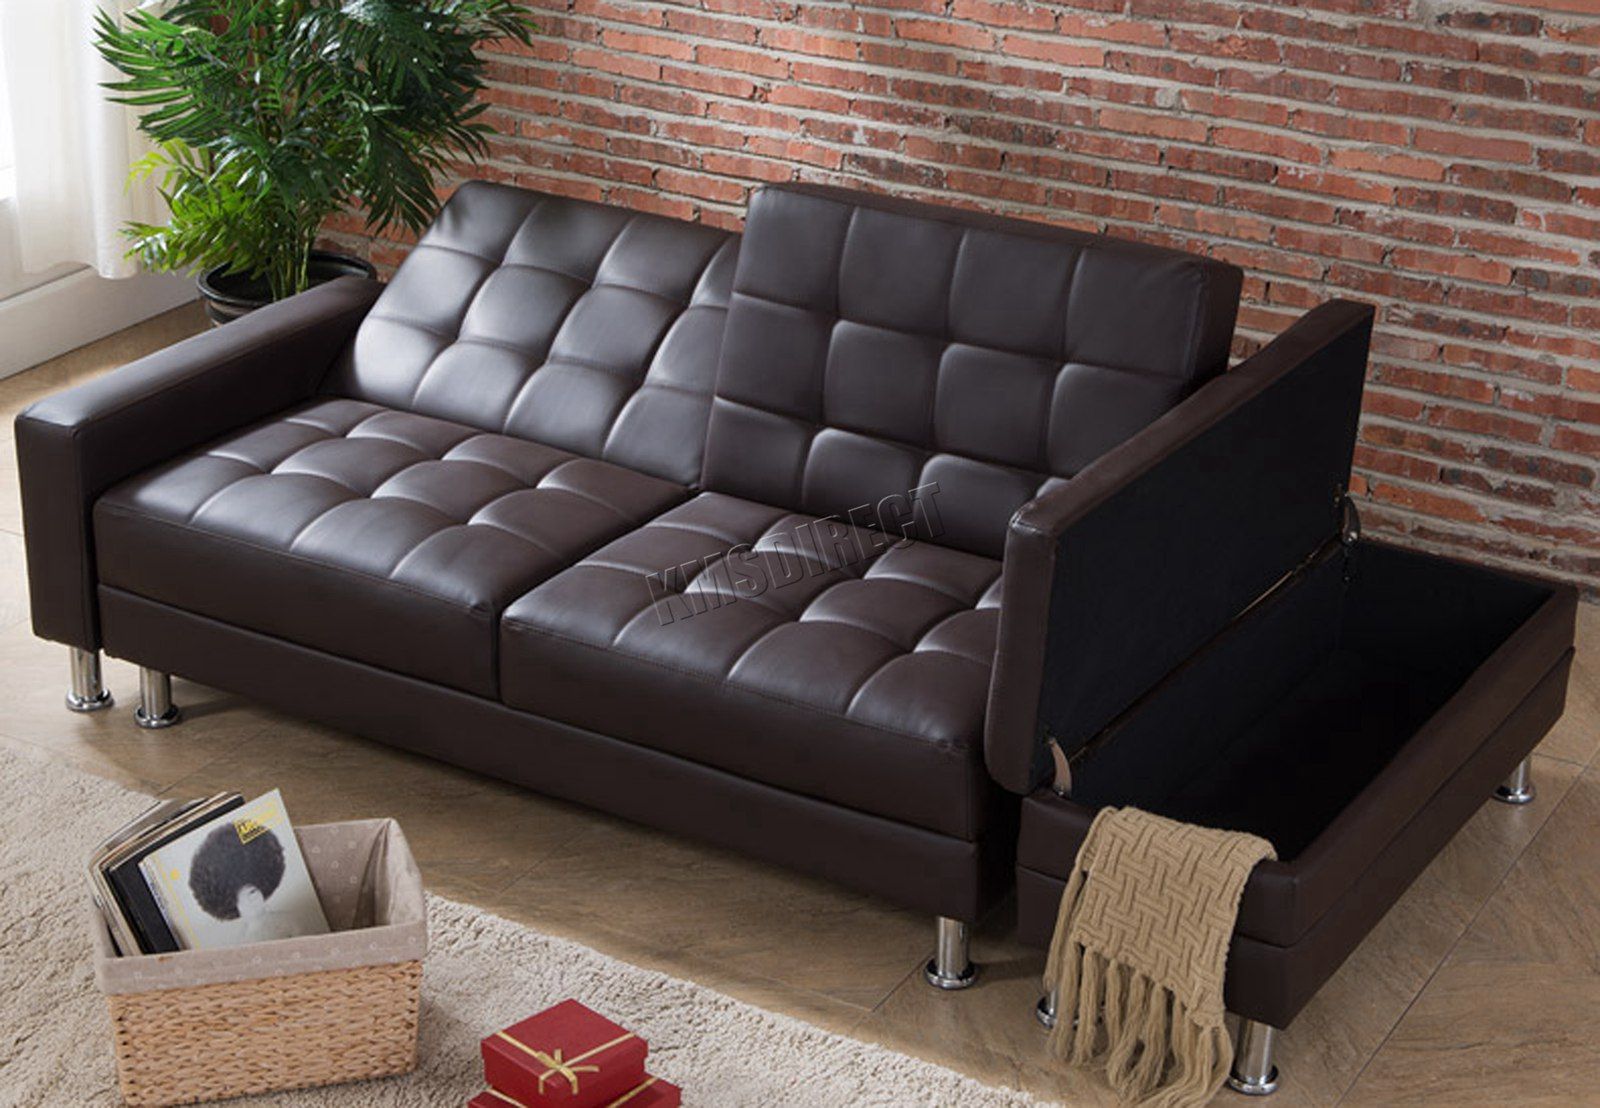 Westwood Pu Sofa Bed With Storage 3 Seater Guest Sleeper In Liberty Sectional Futon Sofas With Storage (View 1 of 15)